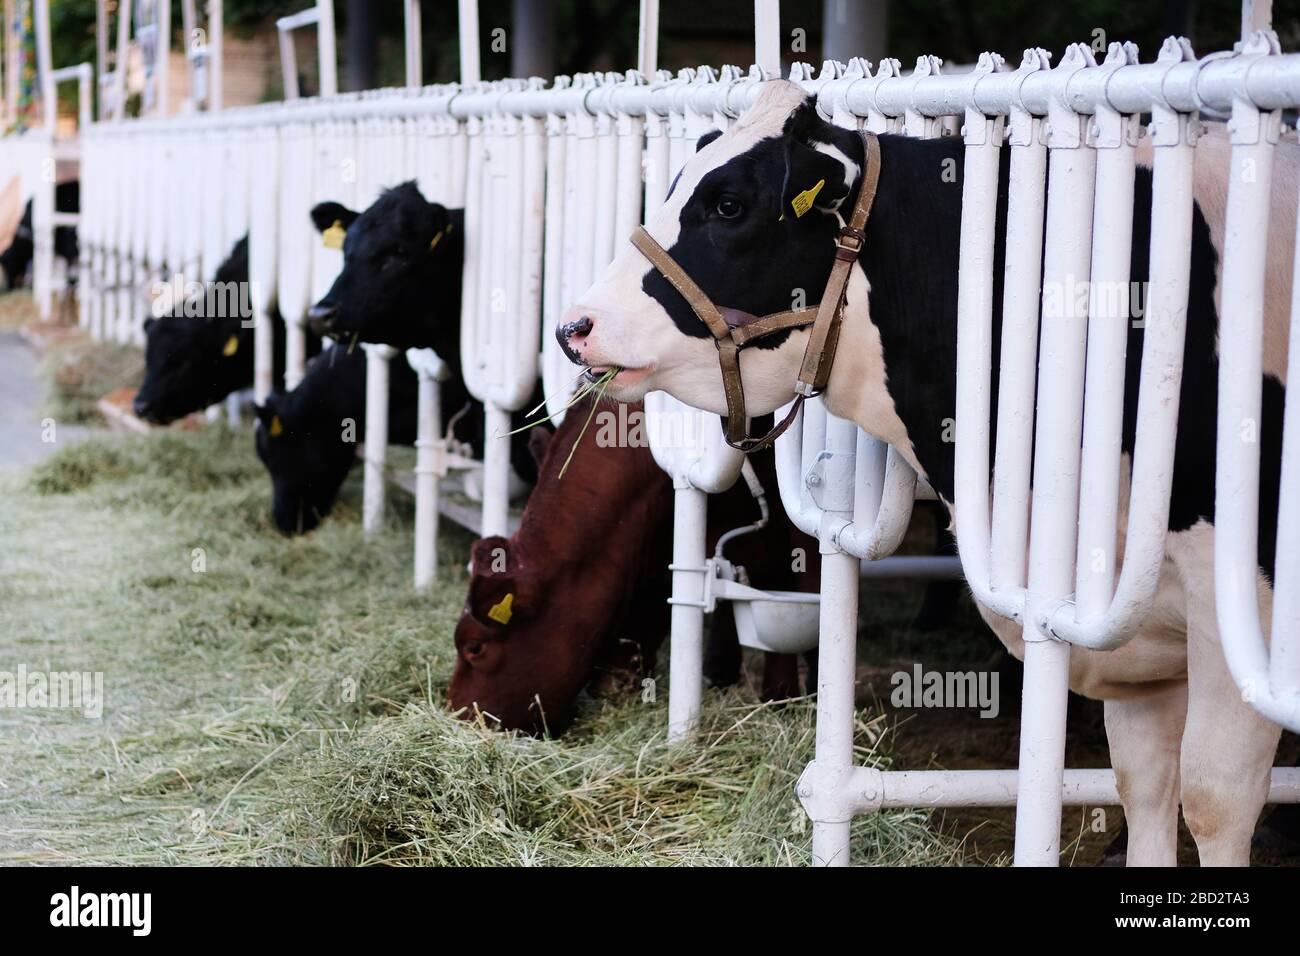 Cows eating hay on farm. Concept of agriculture, farming and livestock. Stock Photo